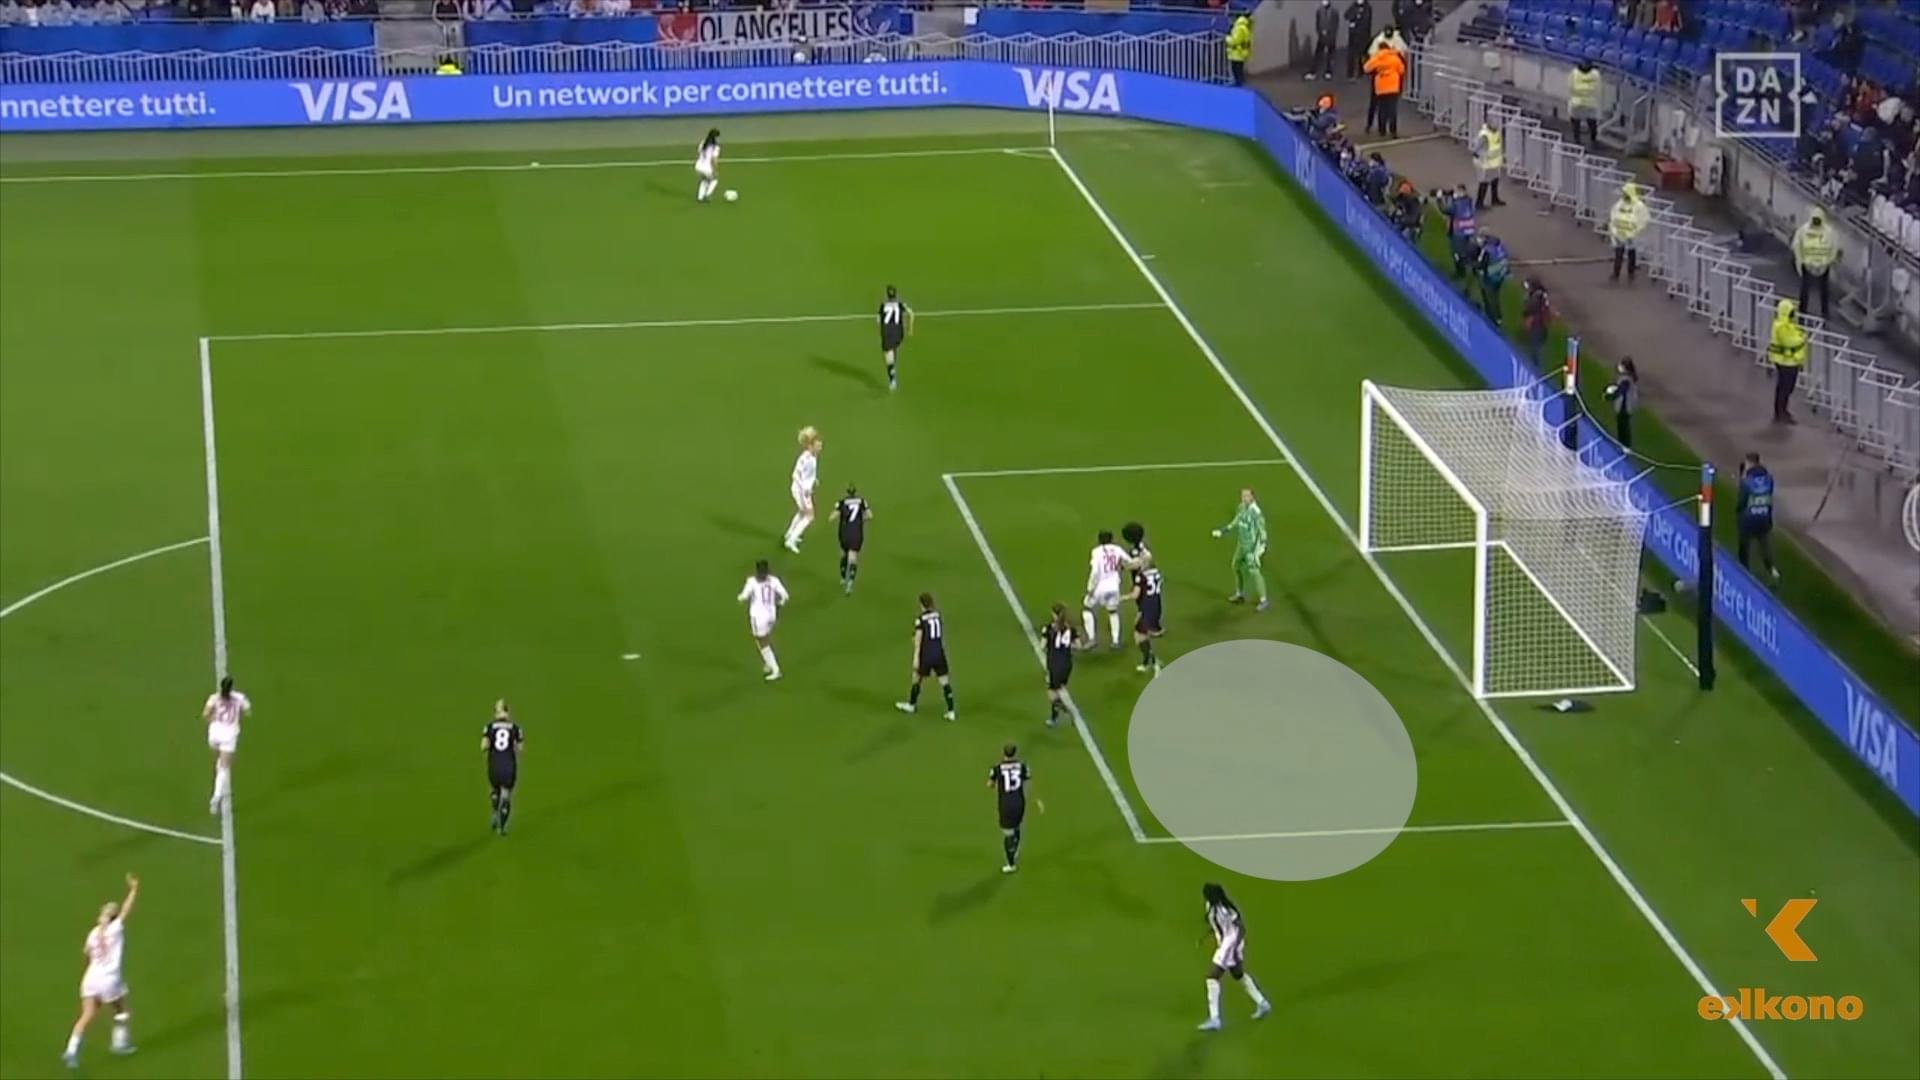 By moving to open spaces, while the defenders are only paying attention to the ball, Hegerberg gets perfect spots to score without opposition